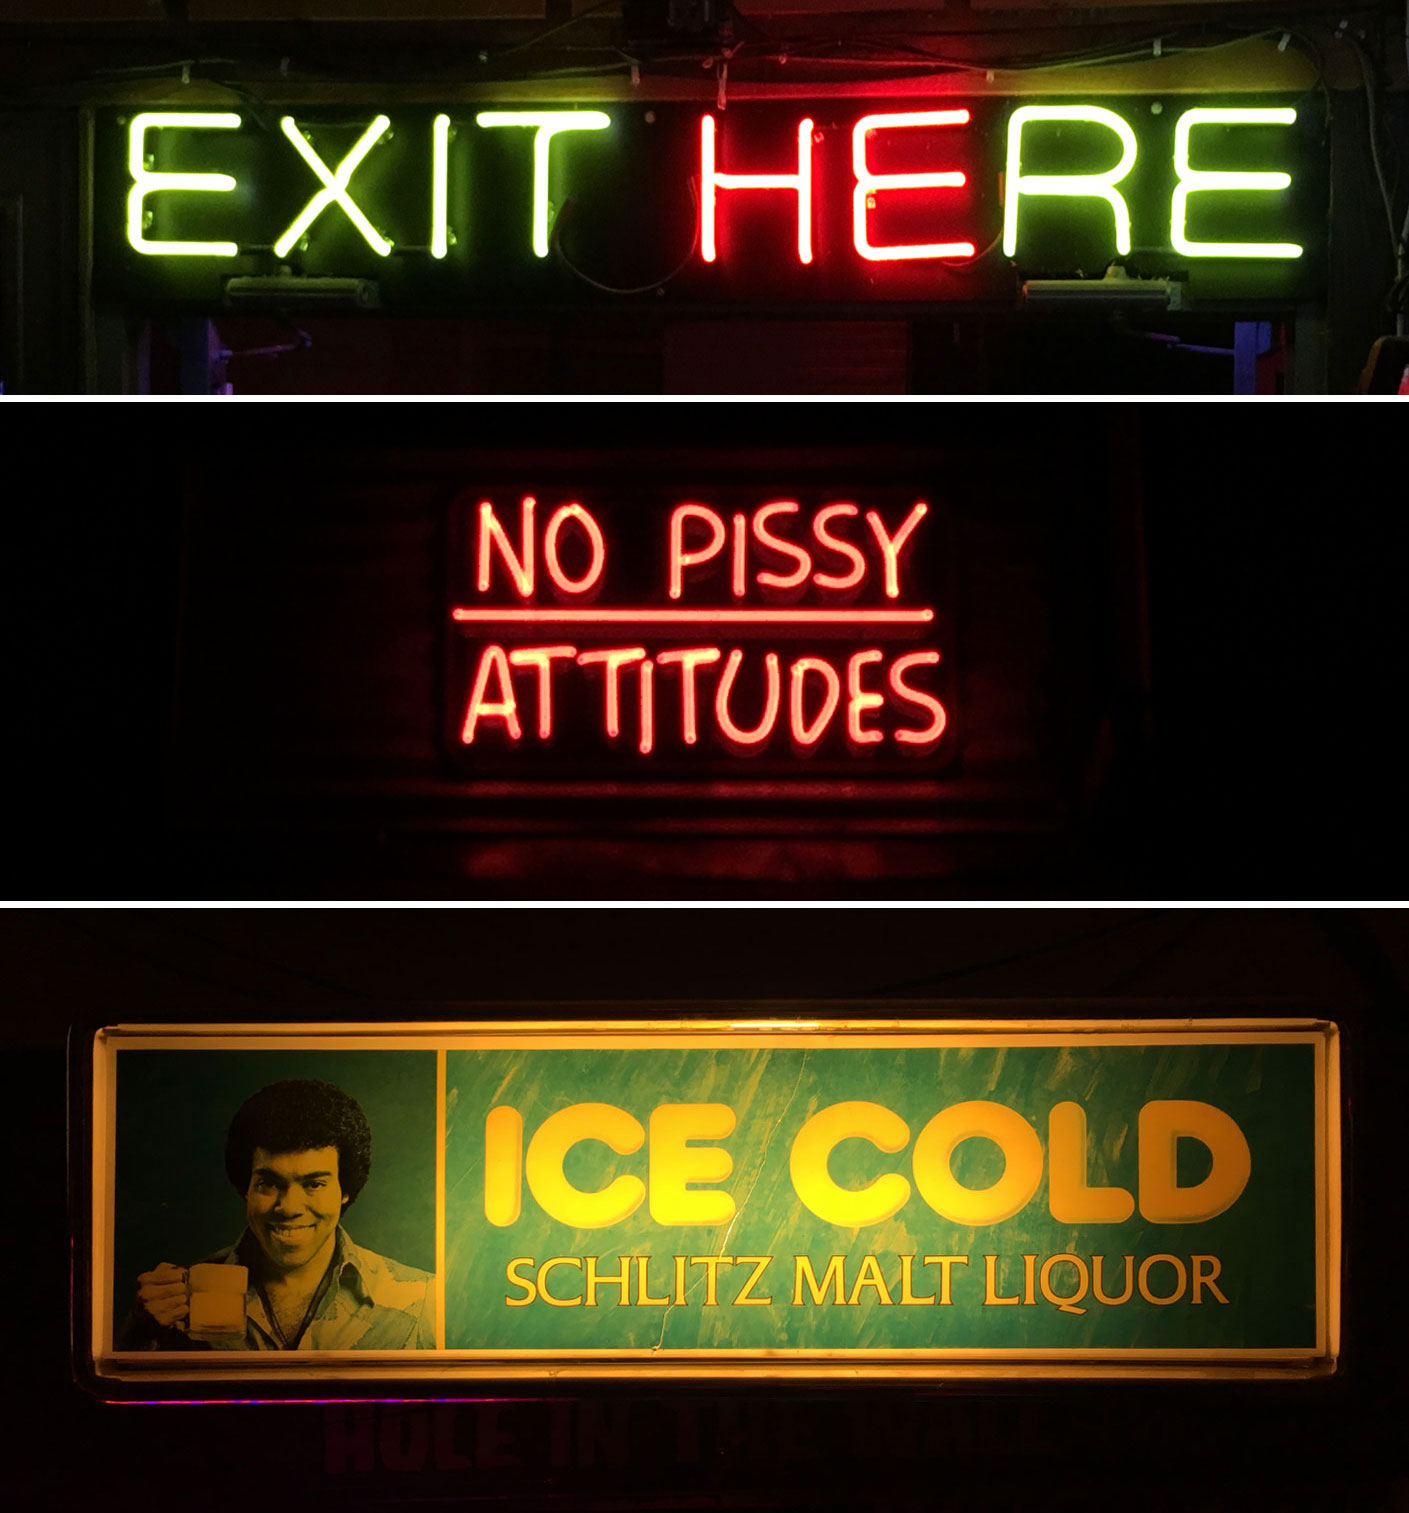 Various Glowing Signs